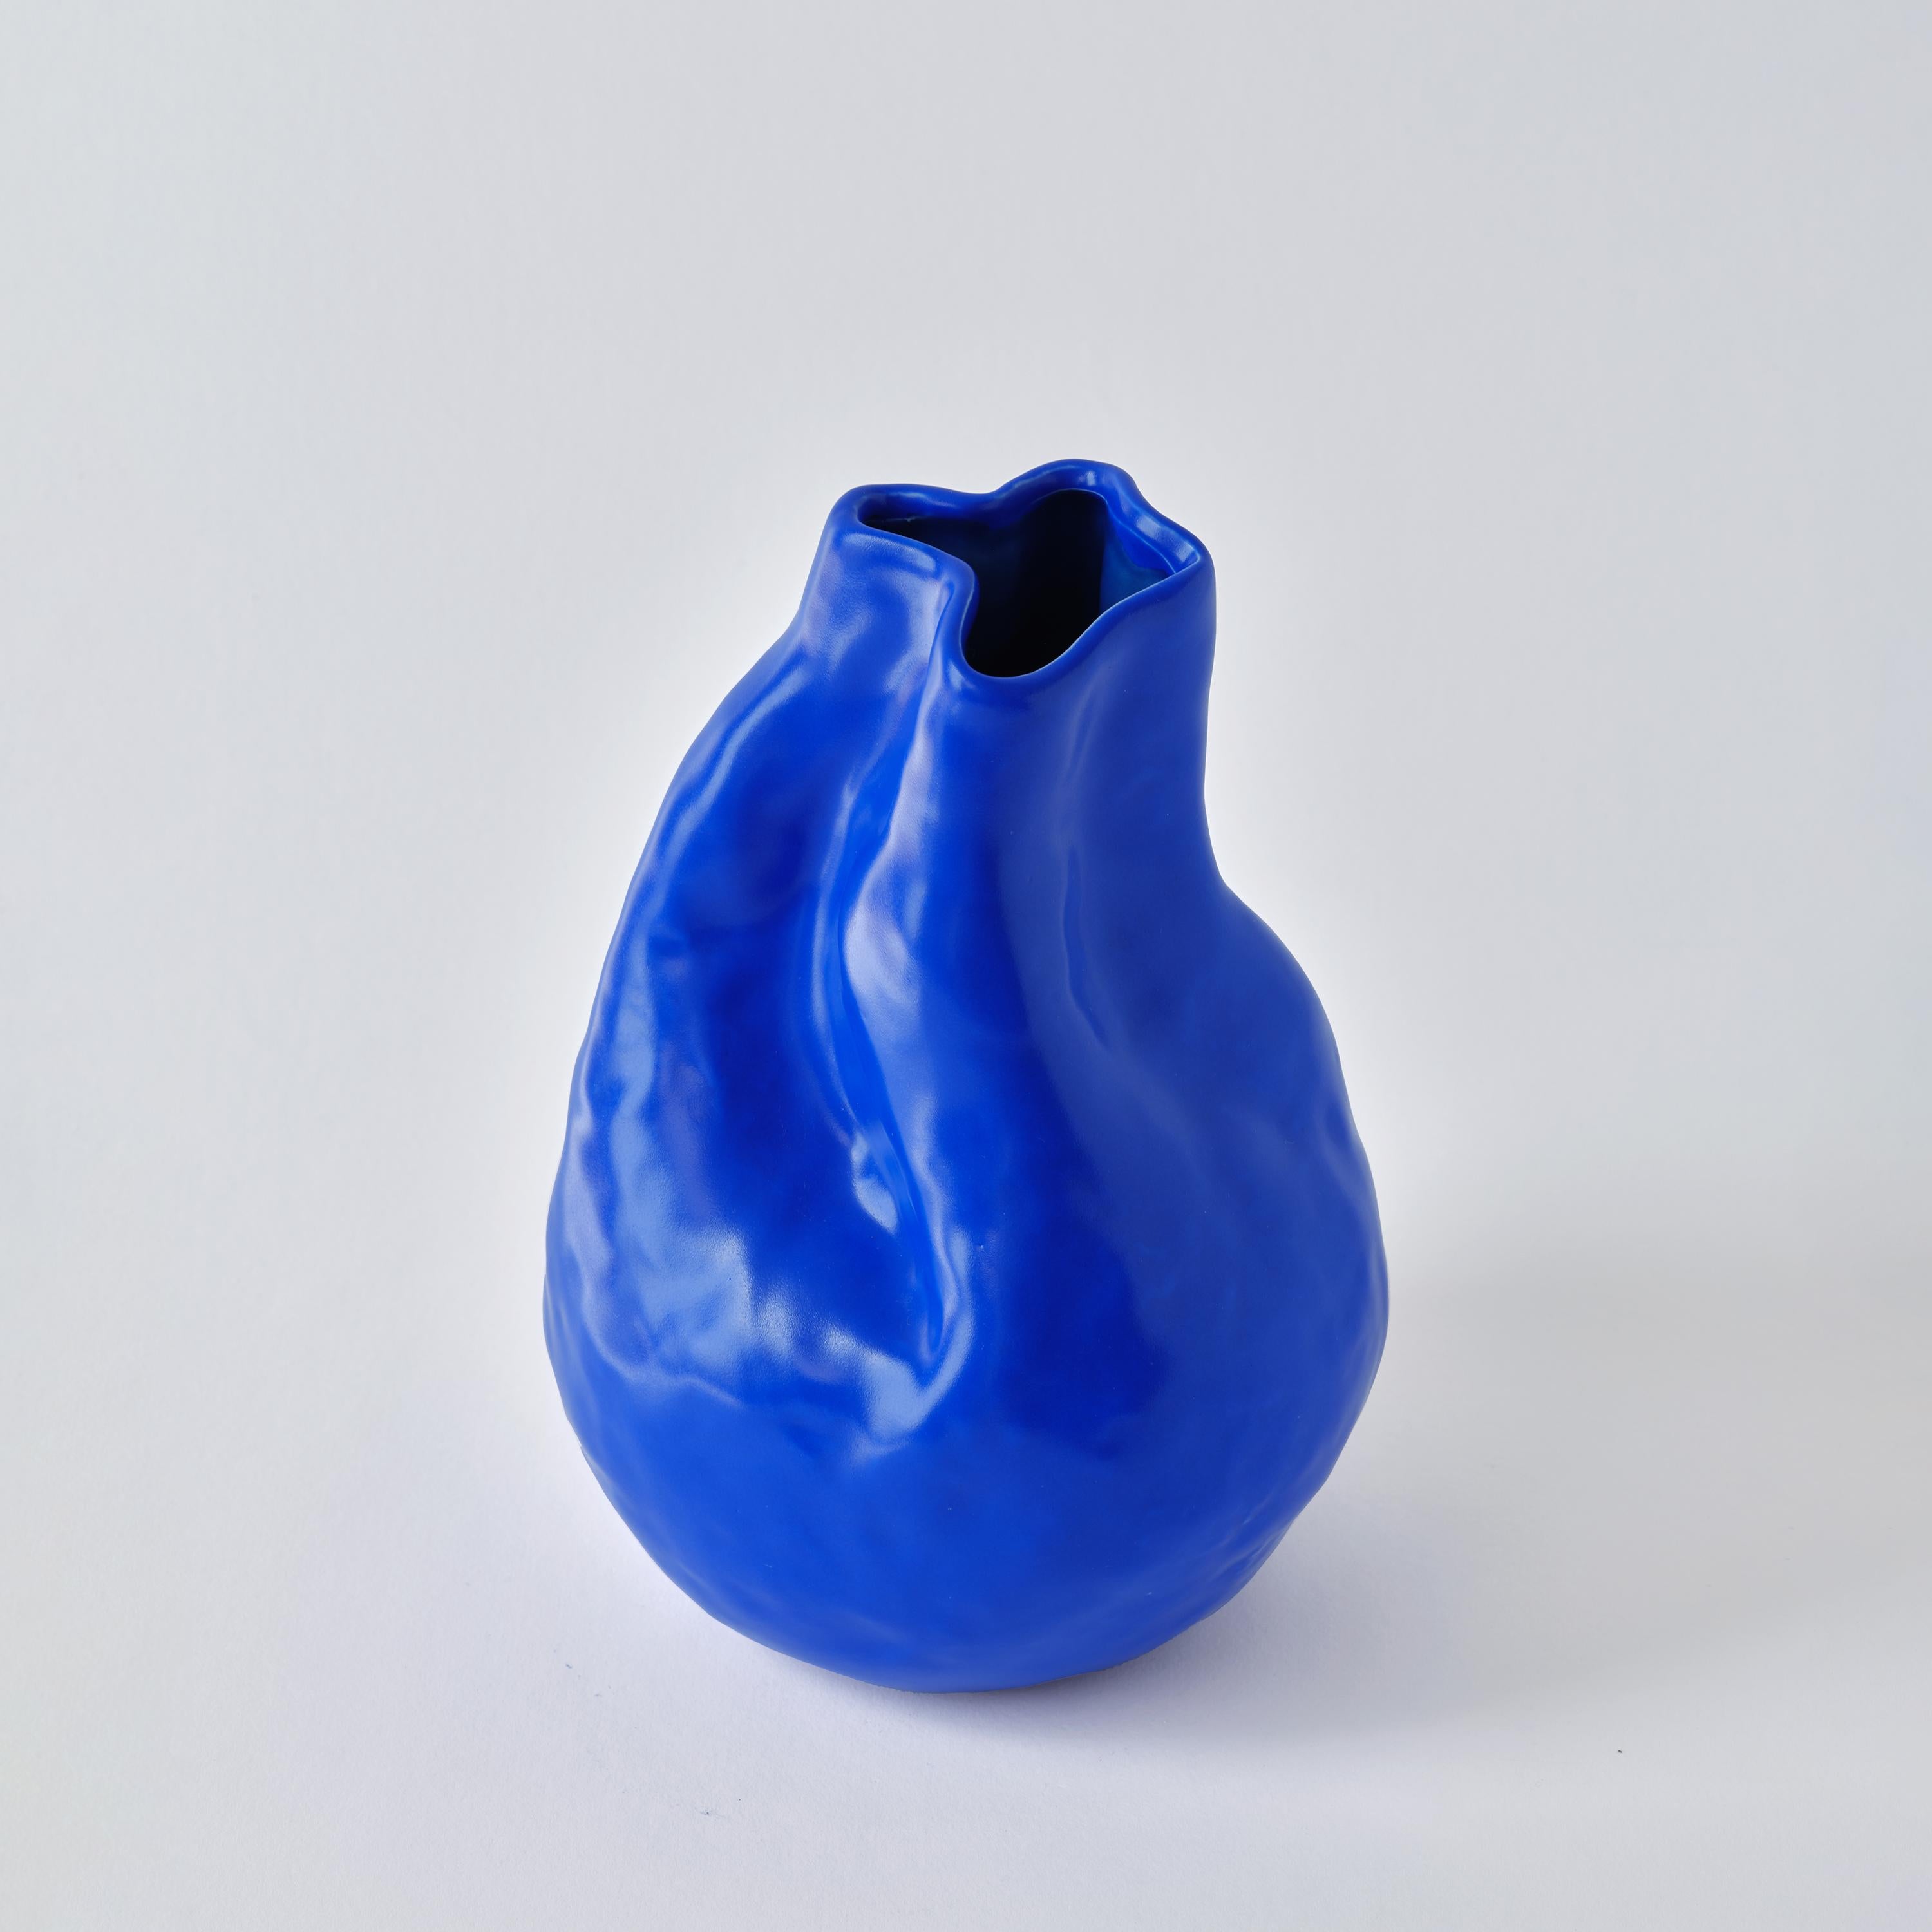 The Alexis blue hand-crafted porcelain vase from The Vibrant Touch Collection is distinguished by its vibrant cobalt blue hue, inspired by the iconic work of Yves Klein. The vase's surface is a testament to textured artistry, with a finish that